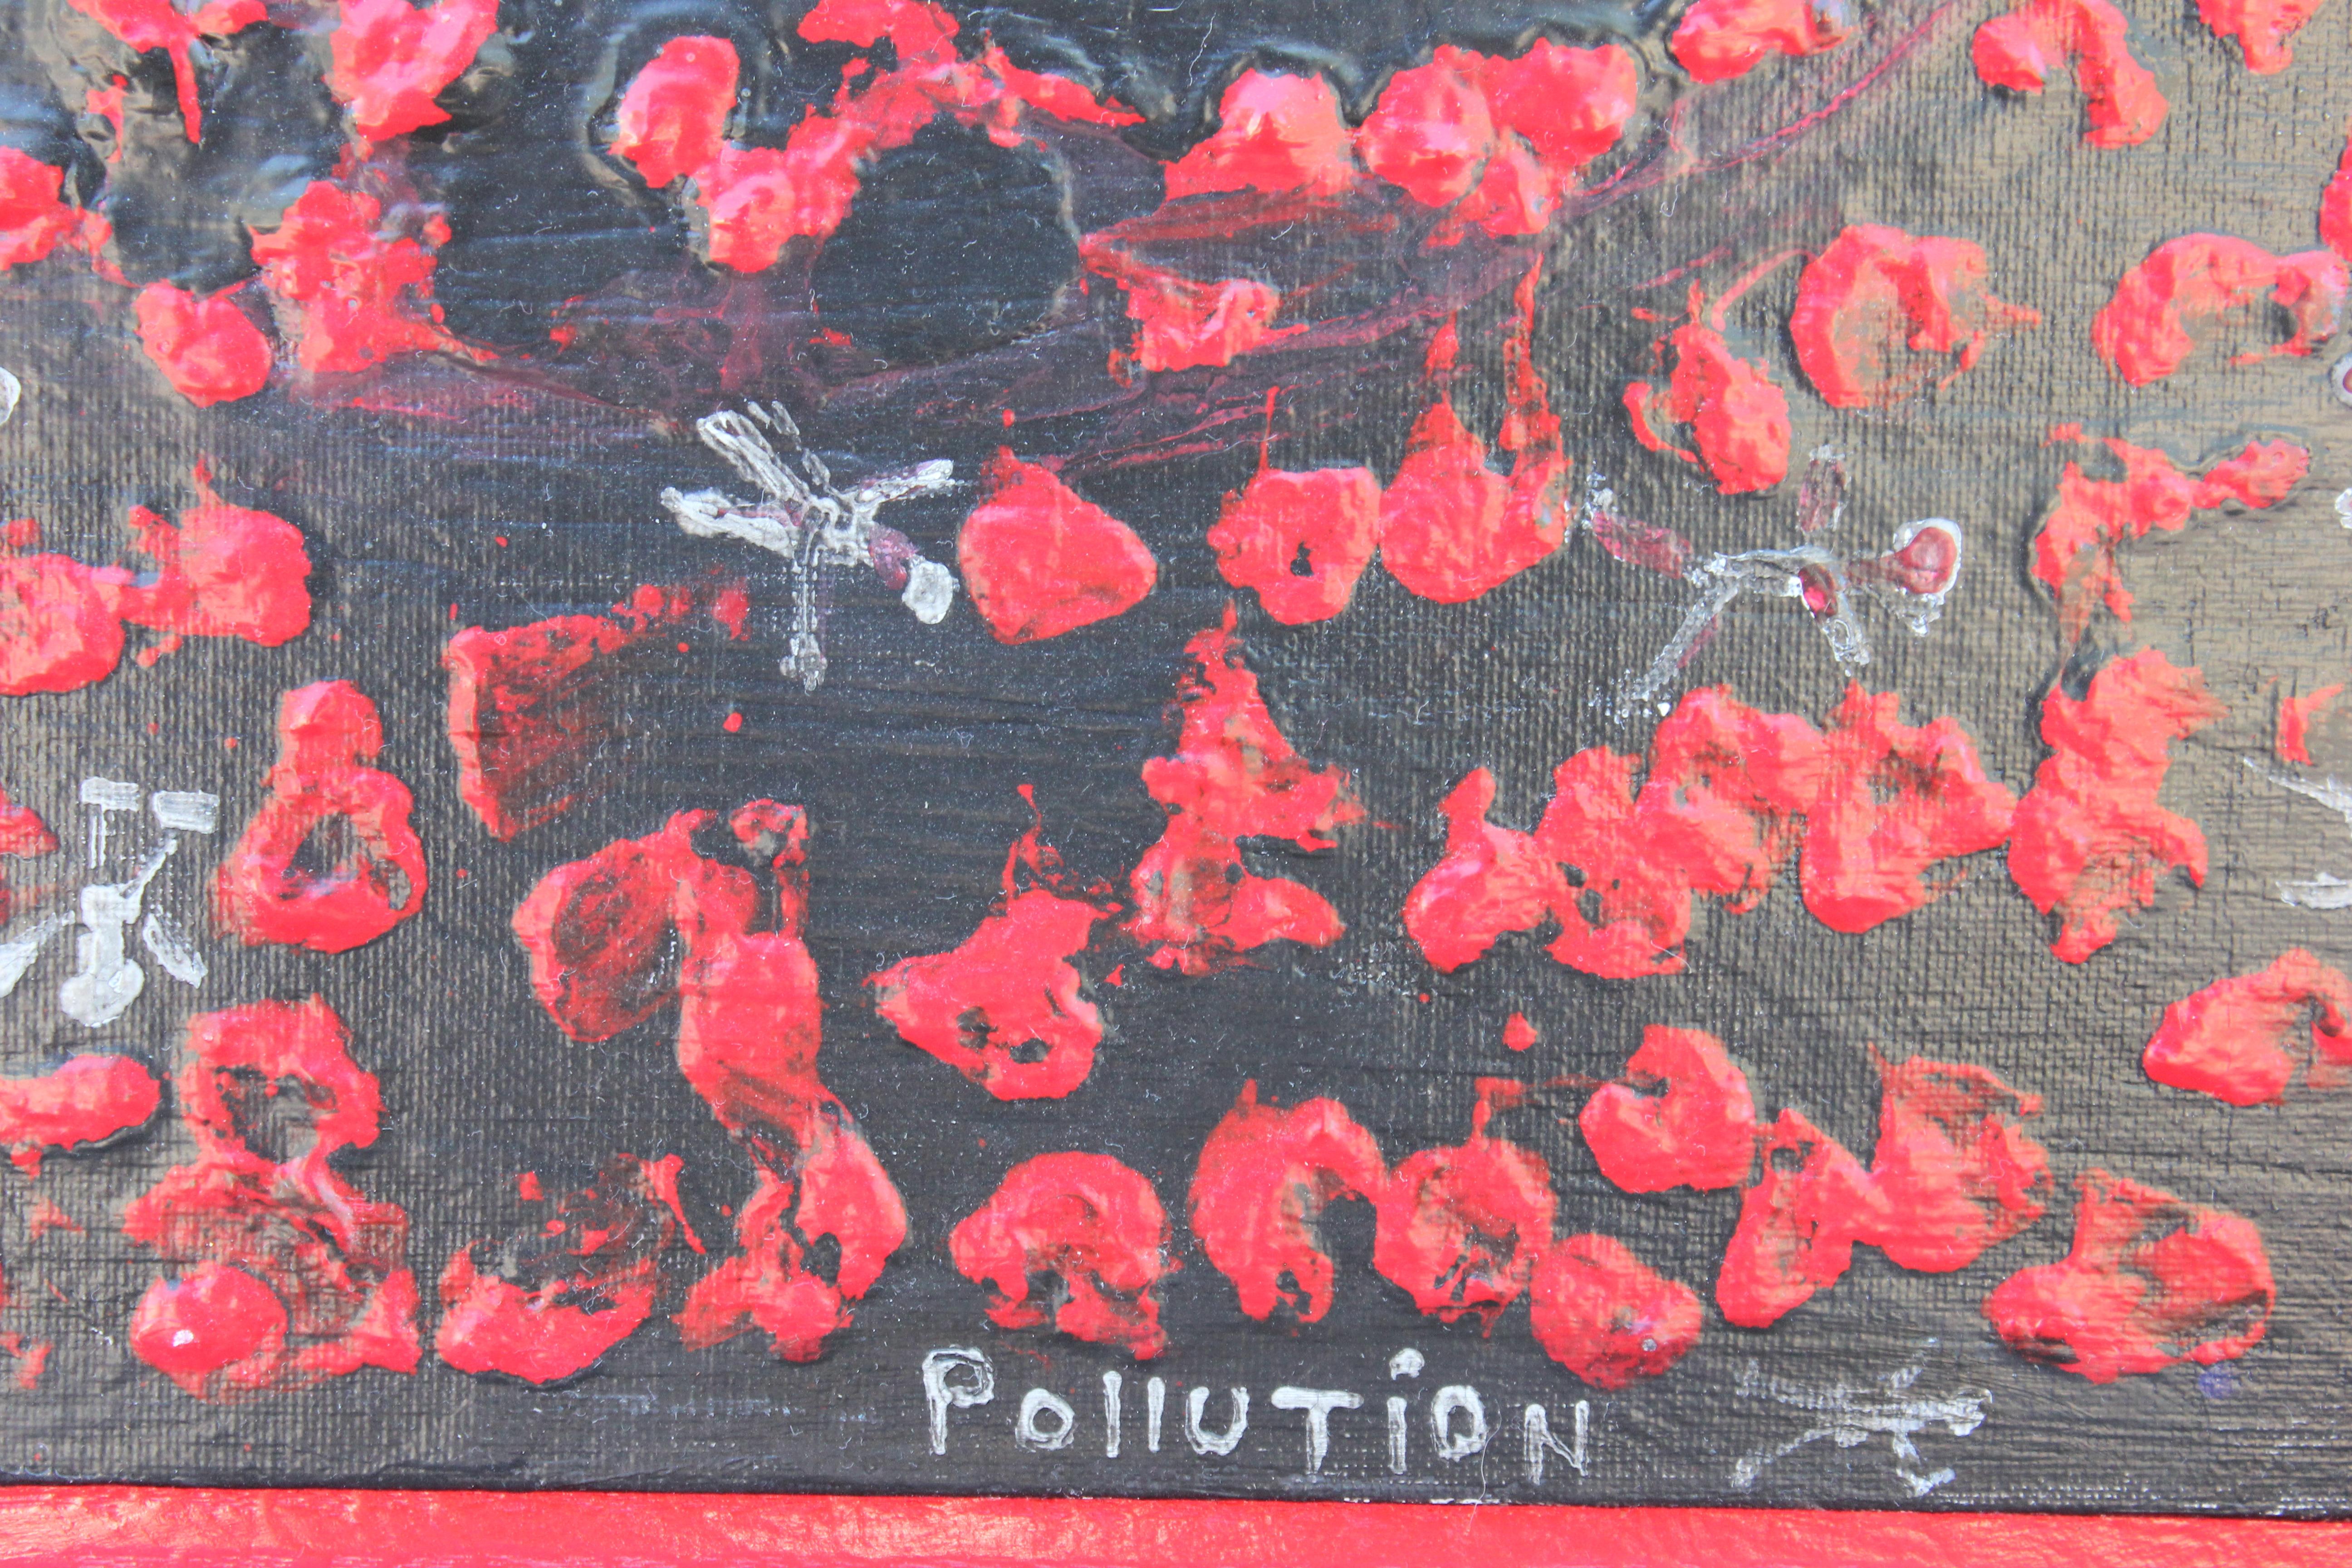 painting of pollution